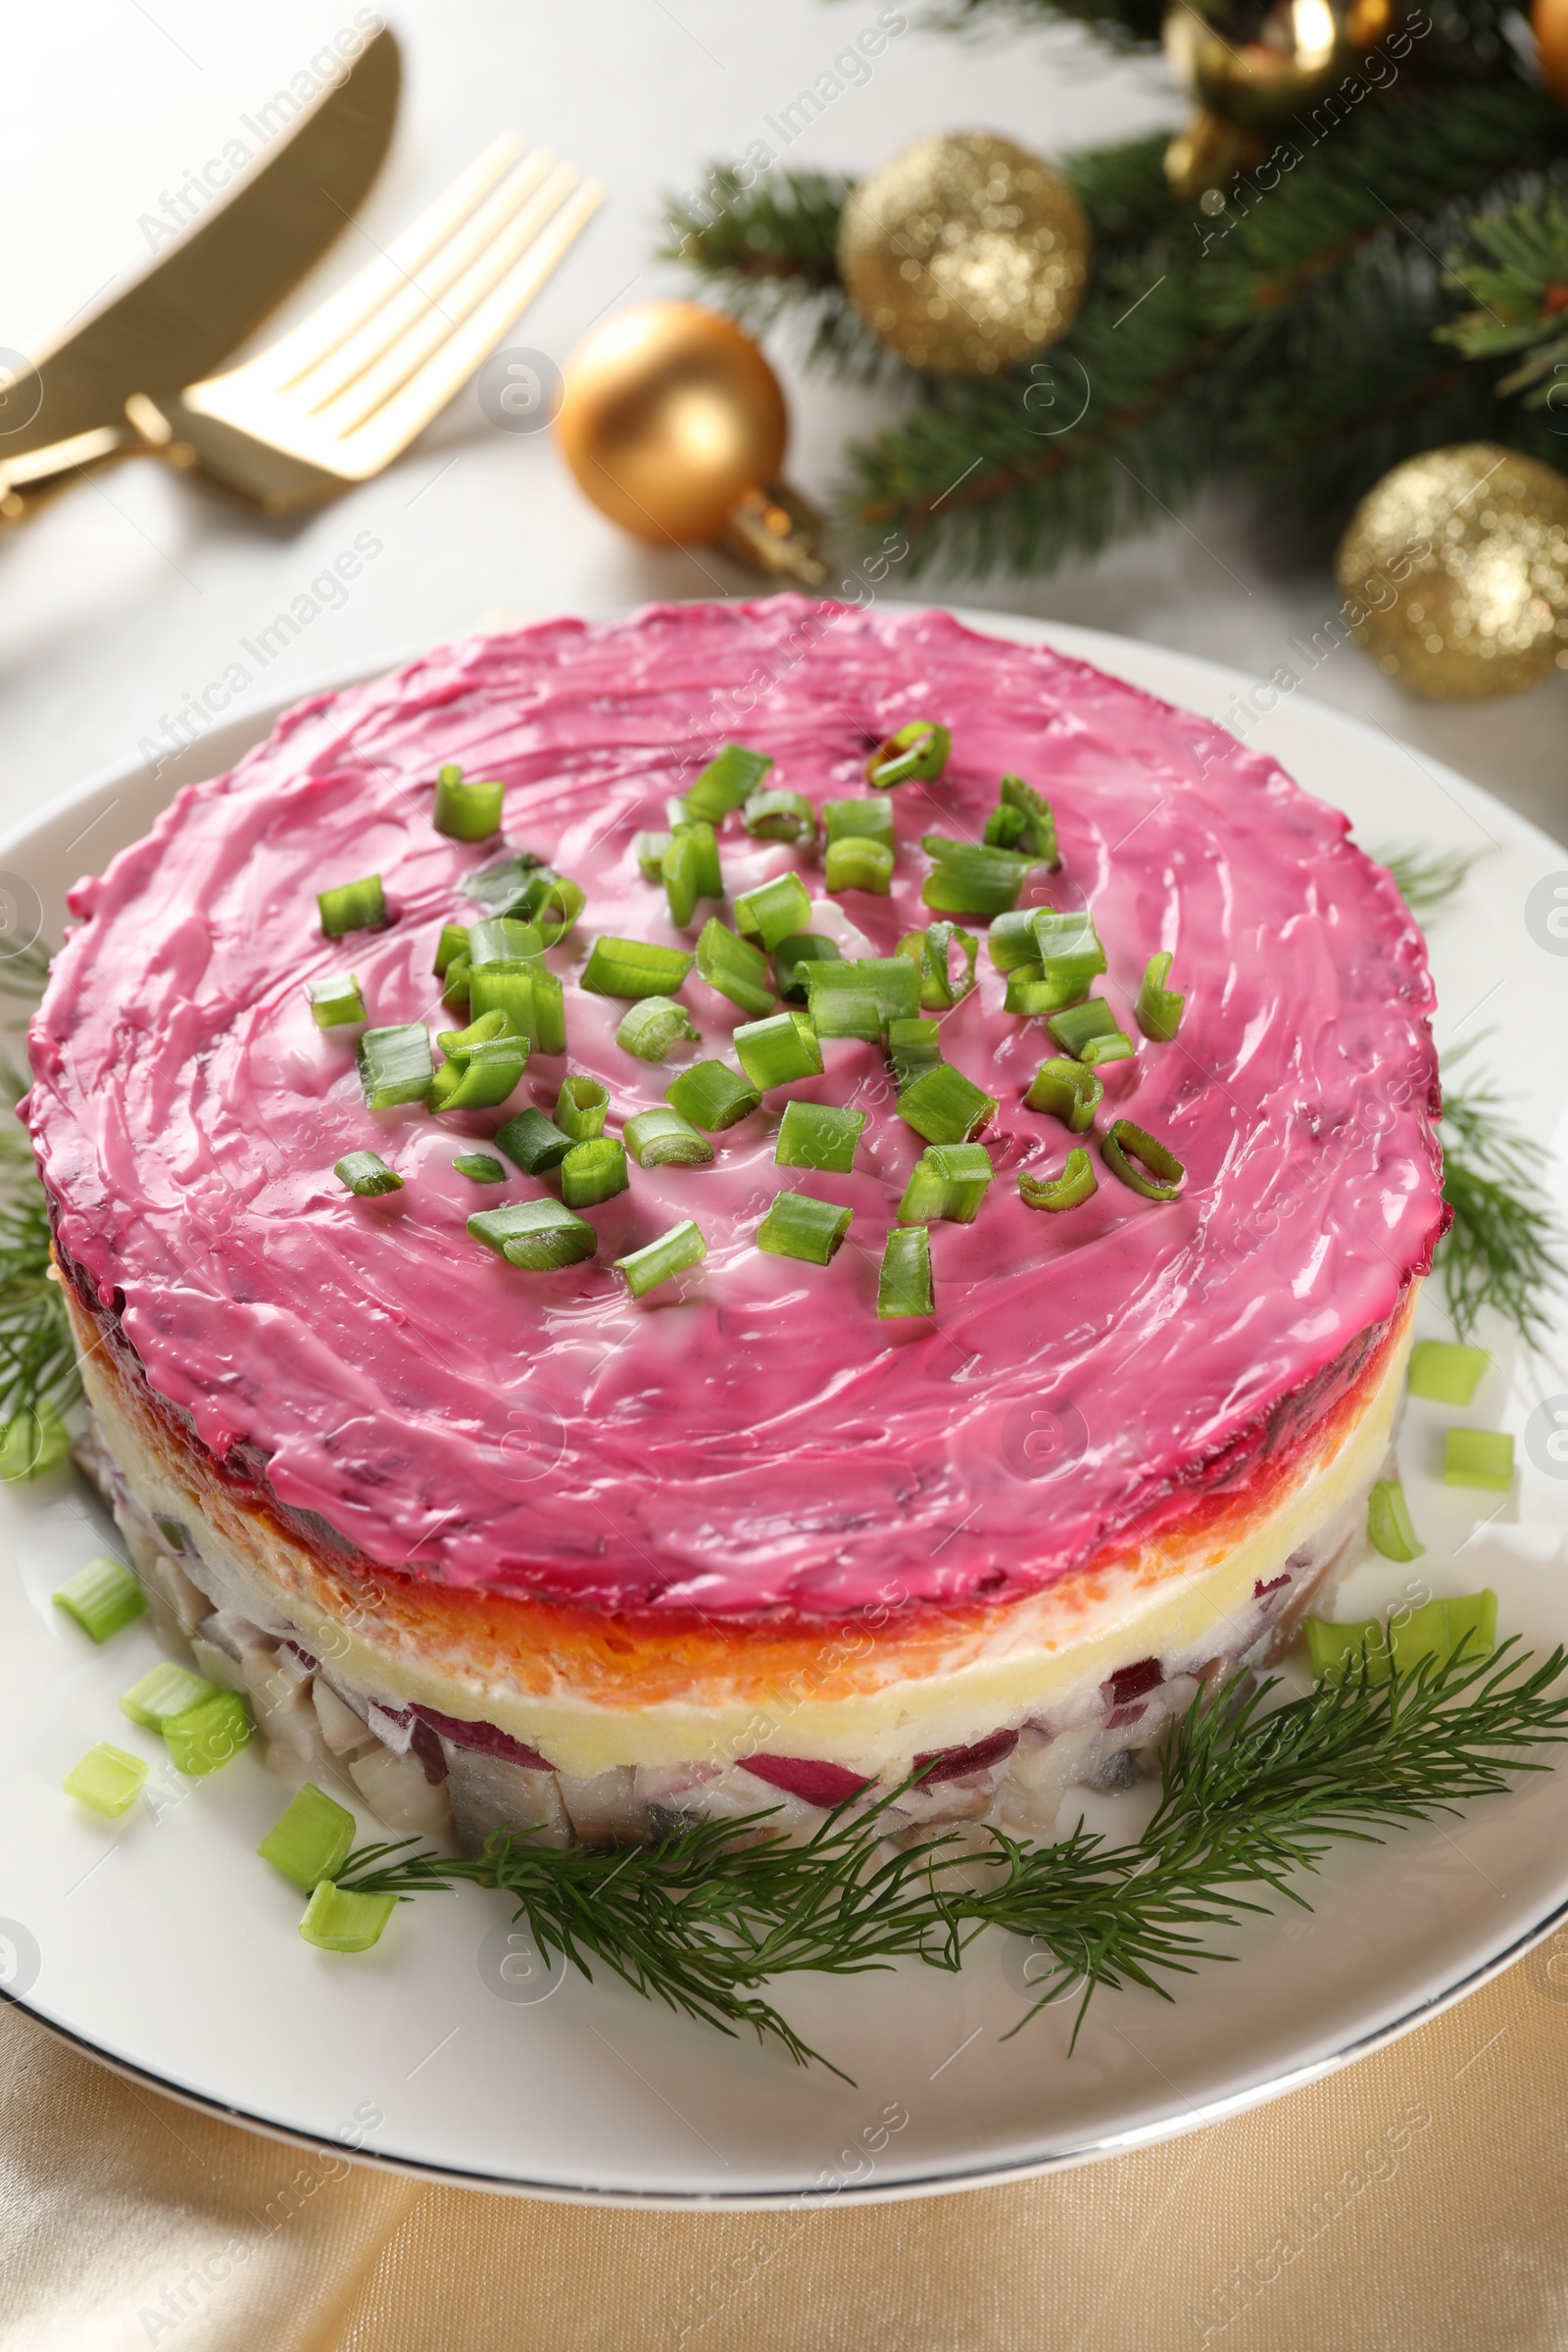 Photo of Herring under fur coat salad and Christmas decor on light grey table, closeup. Traditional Russian dish